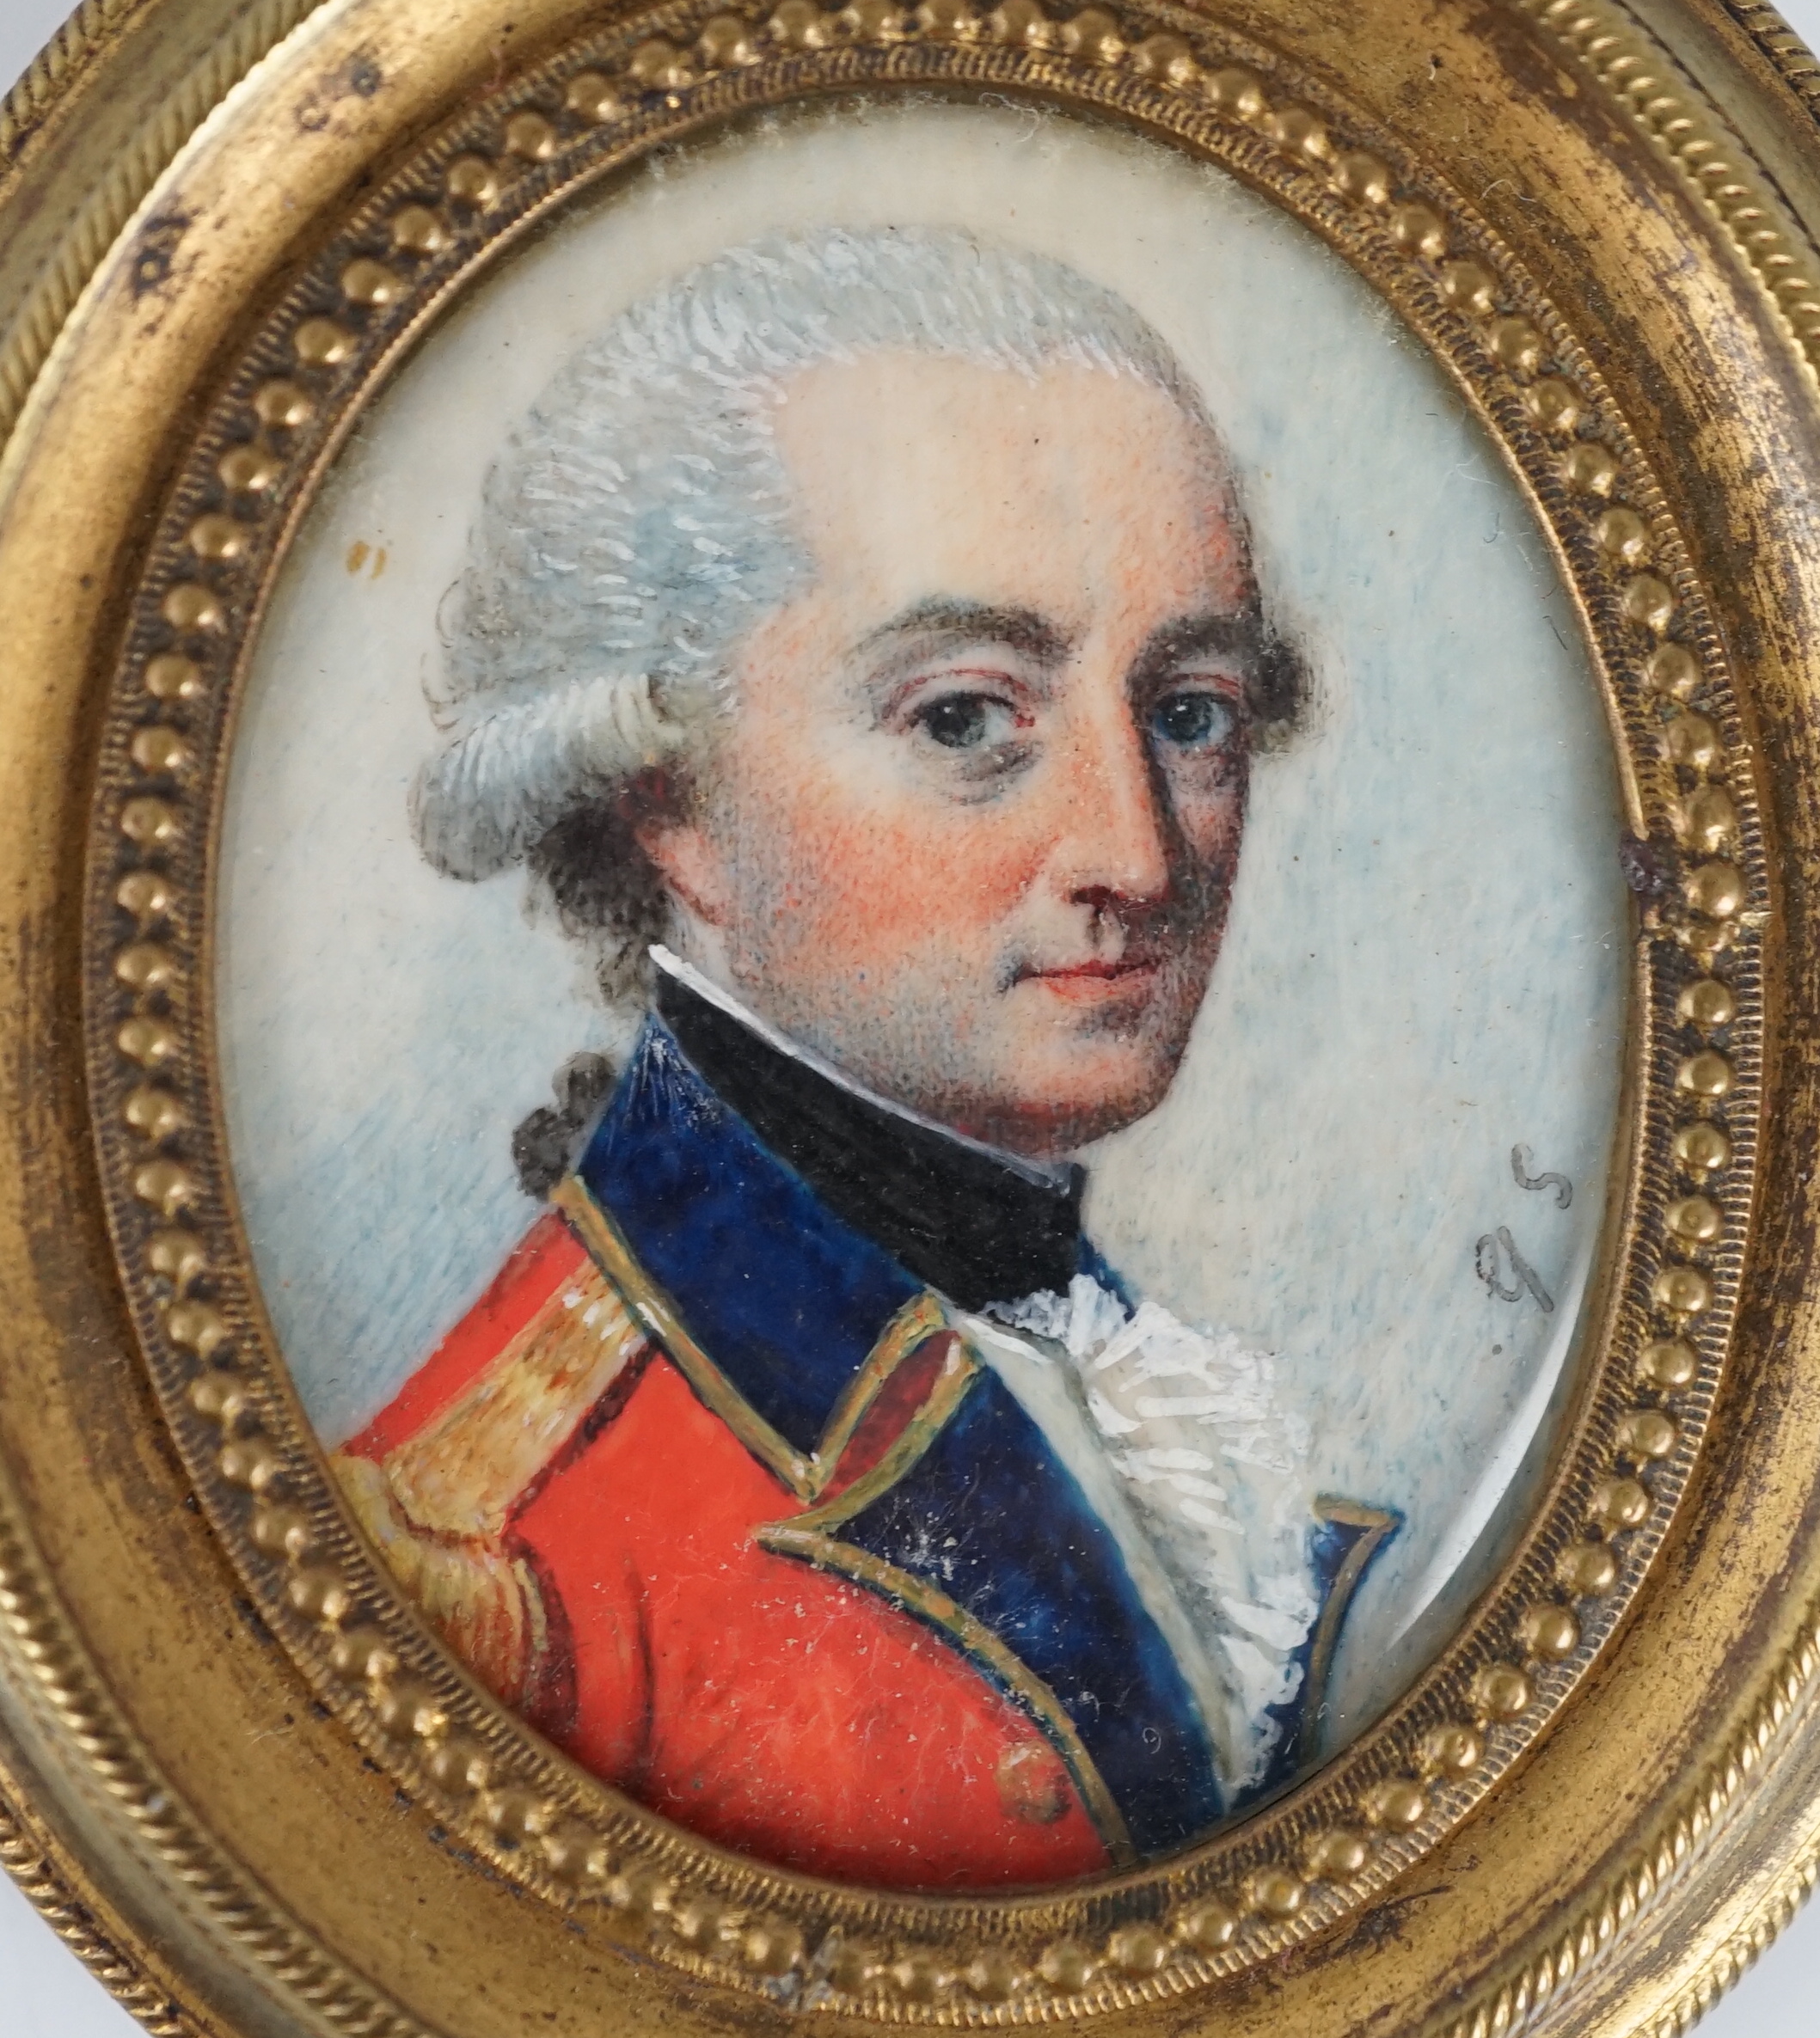 G.S circa 1810, Portrait miniature of an army officer, oil on ivory, 3.8 x 3cm. CITES Submission reference 1FREREYY